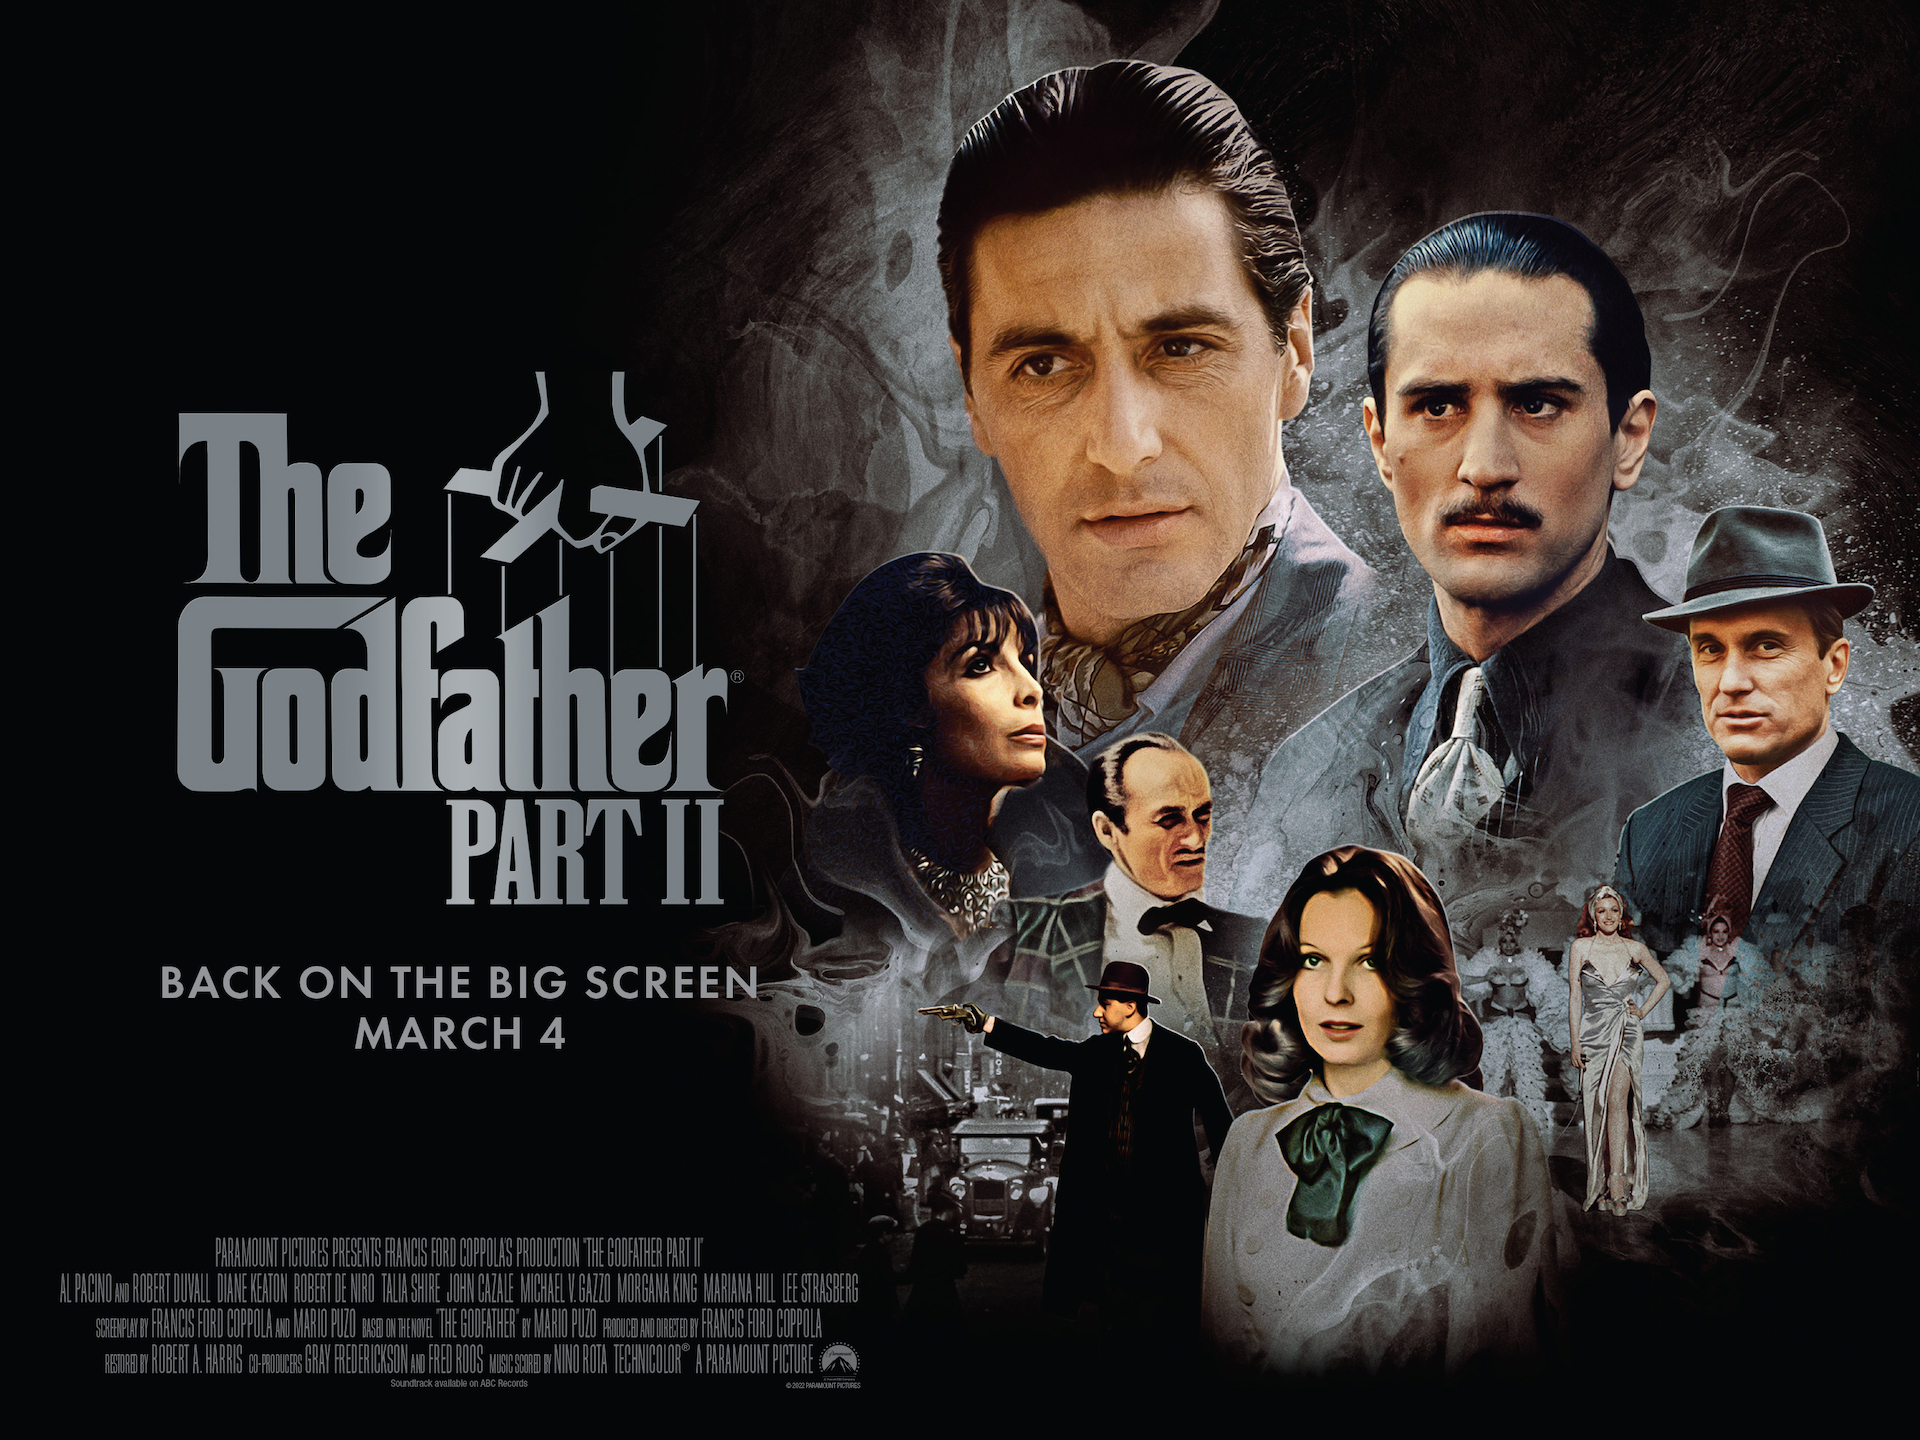 The Godfather 2 Poster Wallpapers